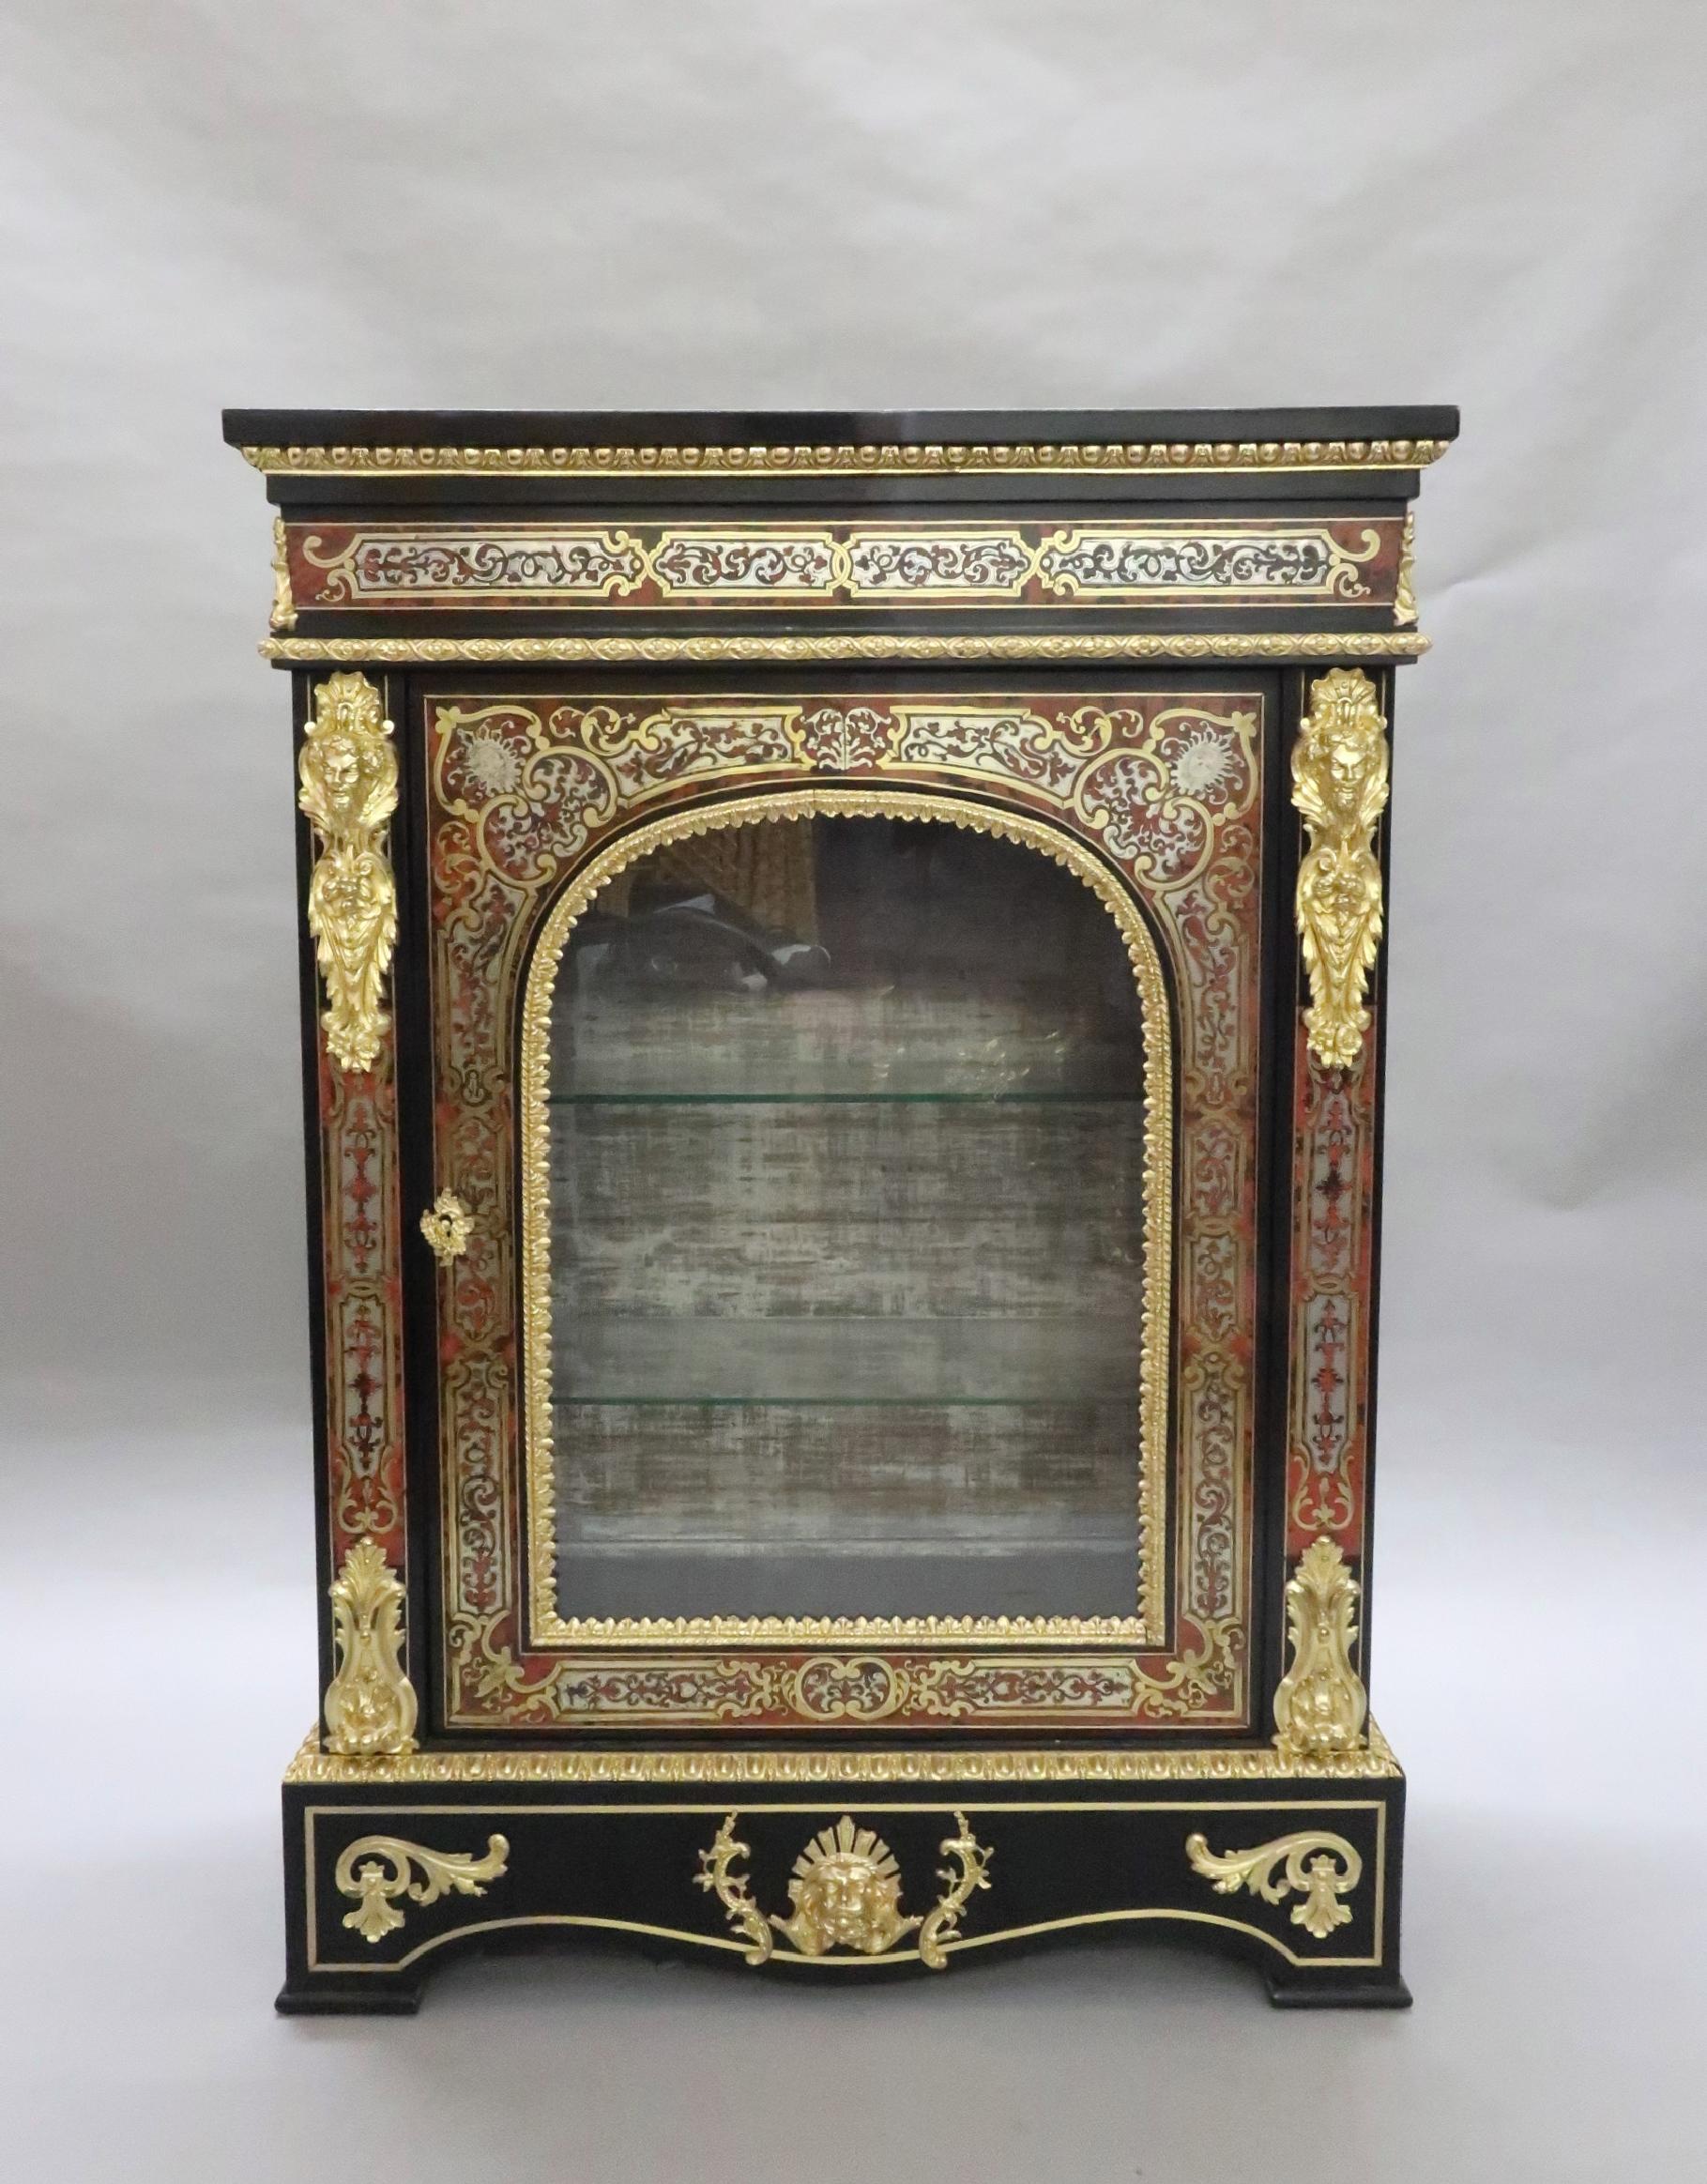 An exceptional pair of English Victorian ebony and ebonized boulle side or display cabinets with red tortoiseshell, pewter and brass inlay in the French Louis XIV style.

The cabinets have scrolling foliate inlaid design to the front with single